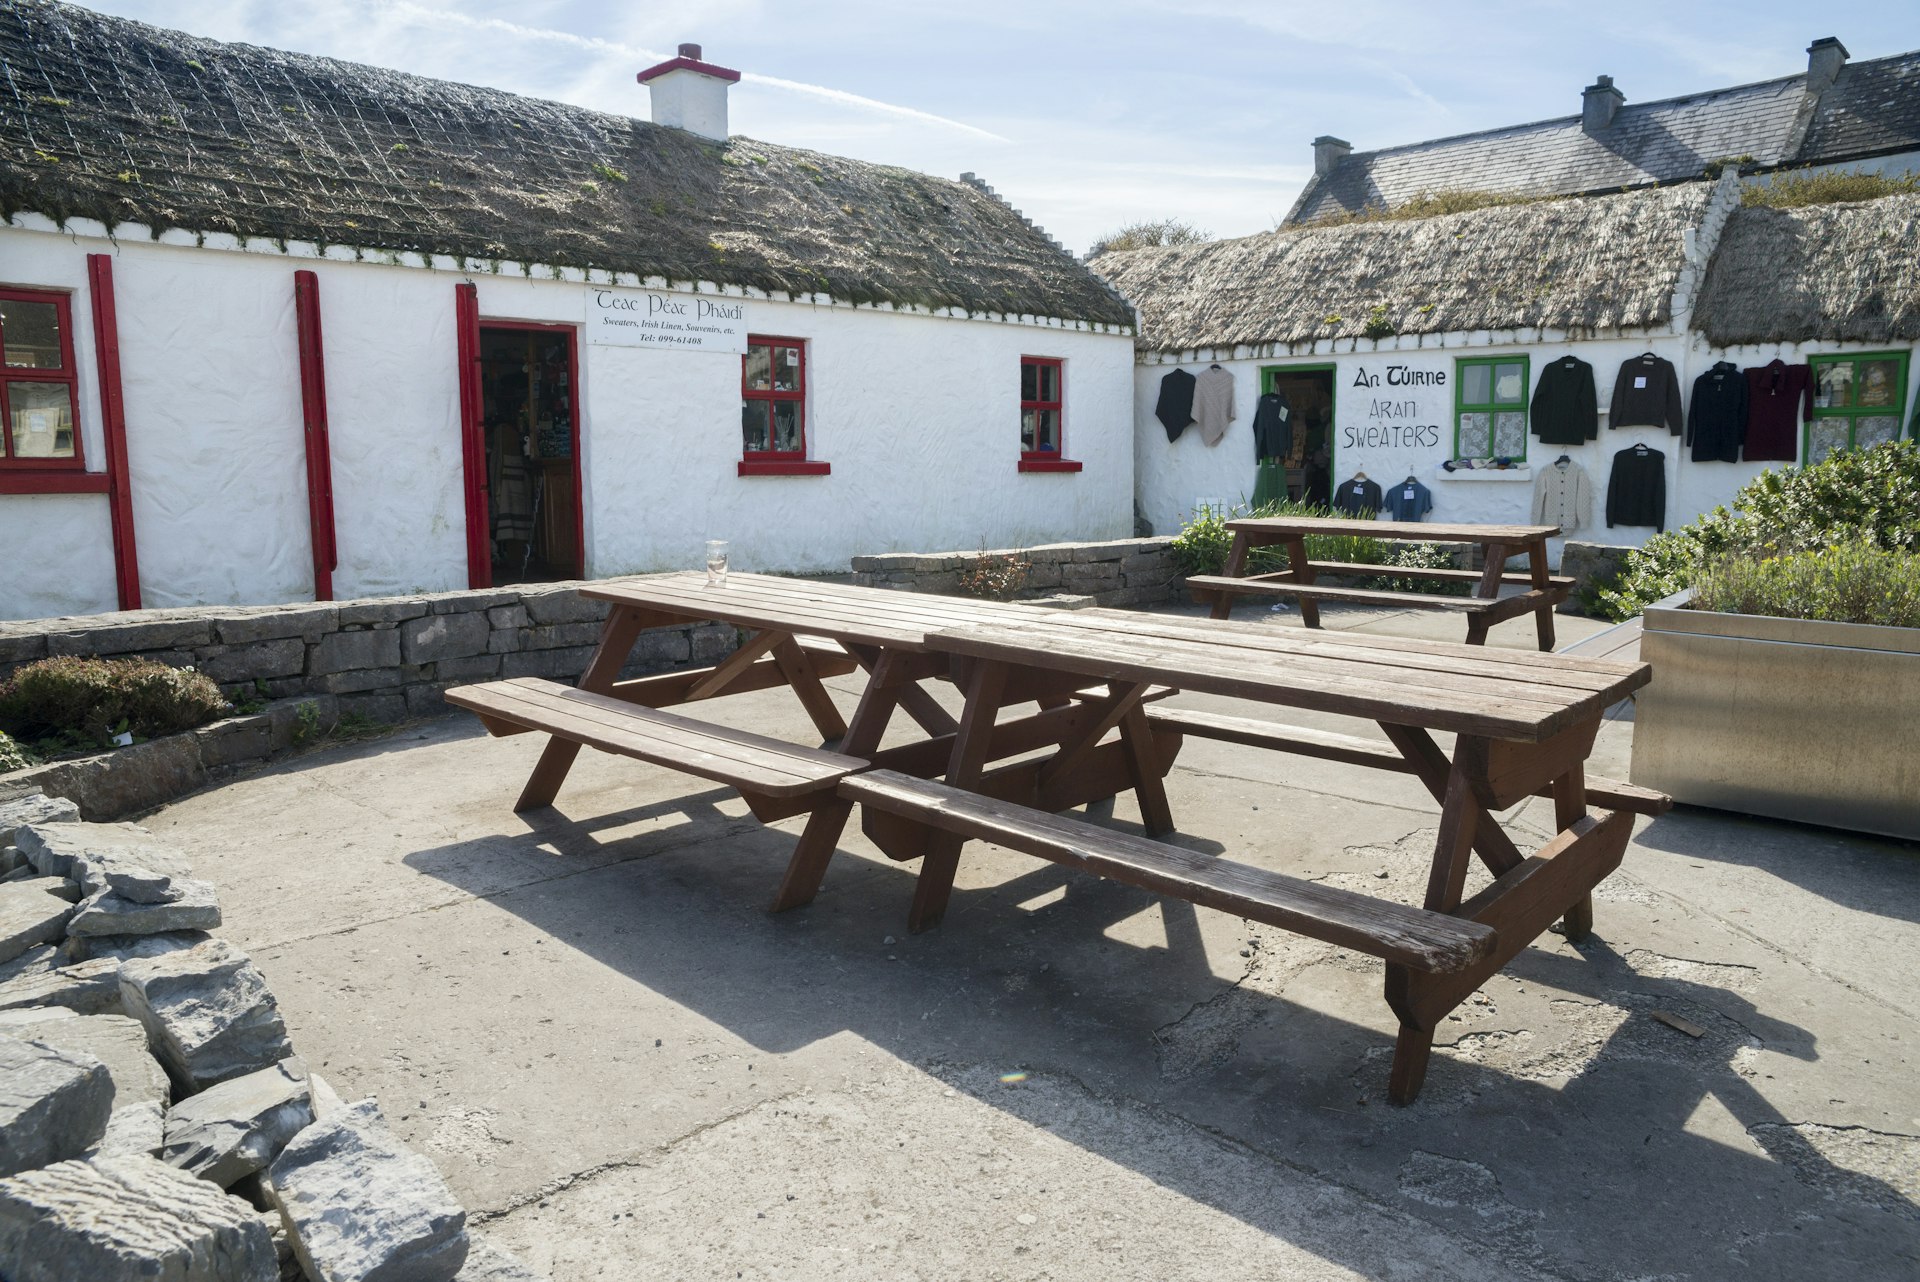 A low-rise white cottage with a thatched roof and picnic benches outside. Aran sweaters are for sale, hanging on one wall